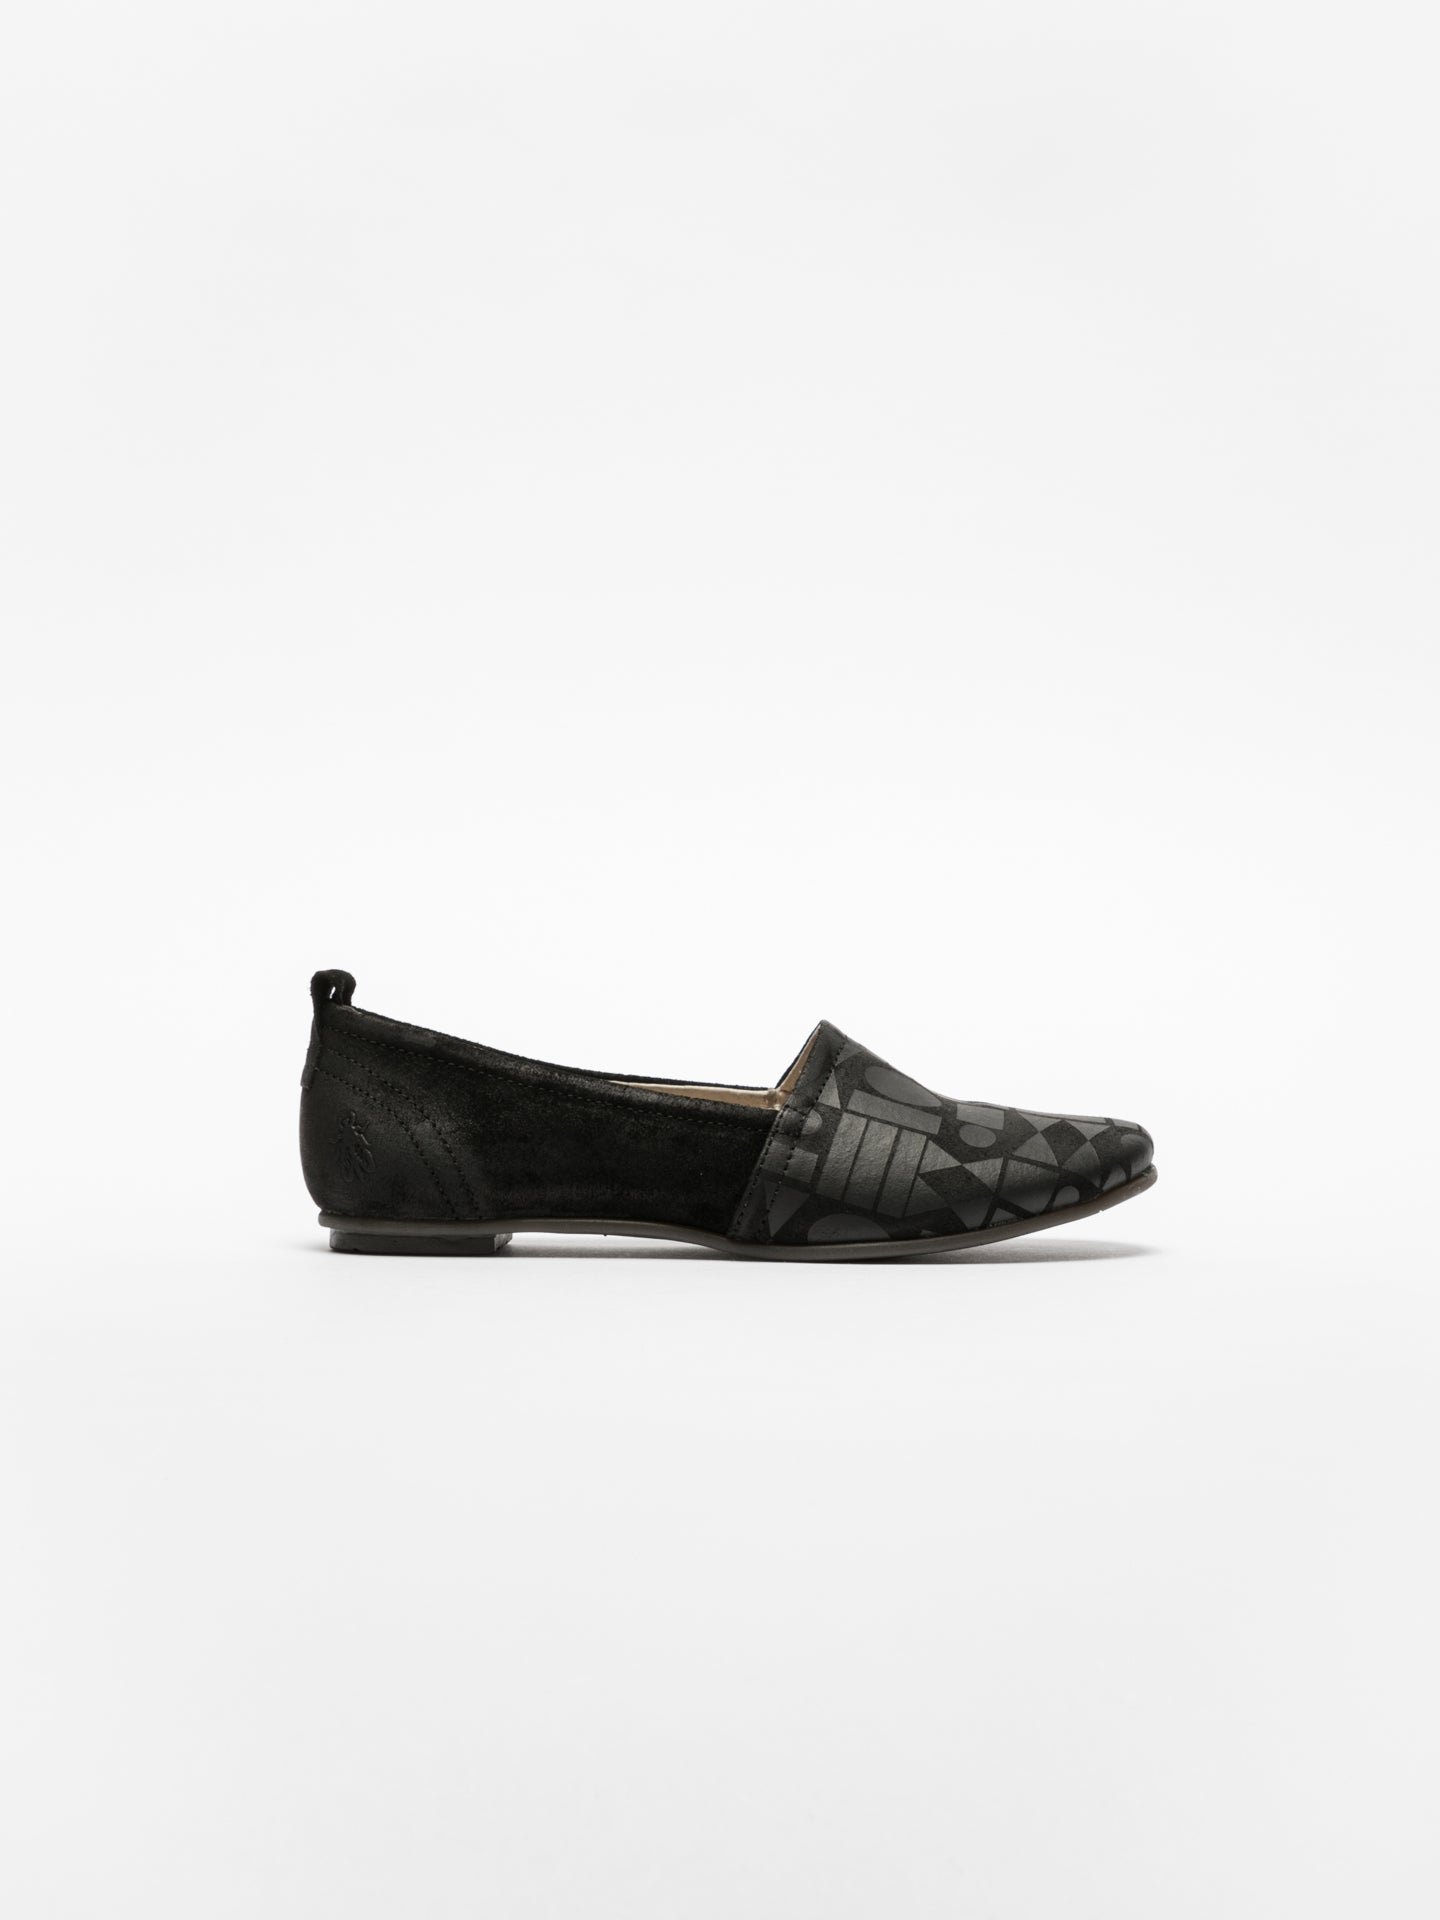 Fly London Black Round Toe Shoes